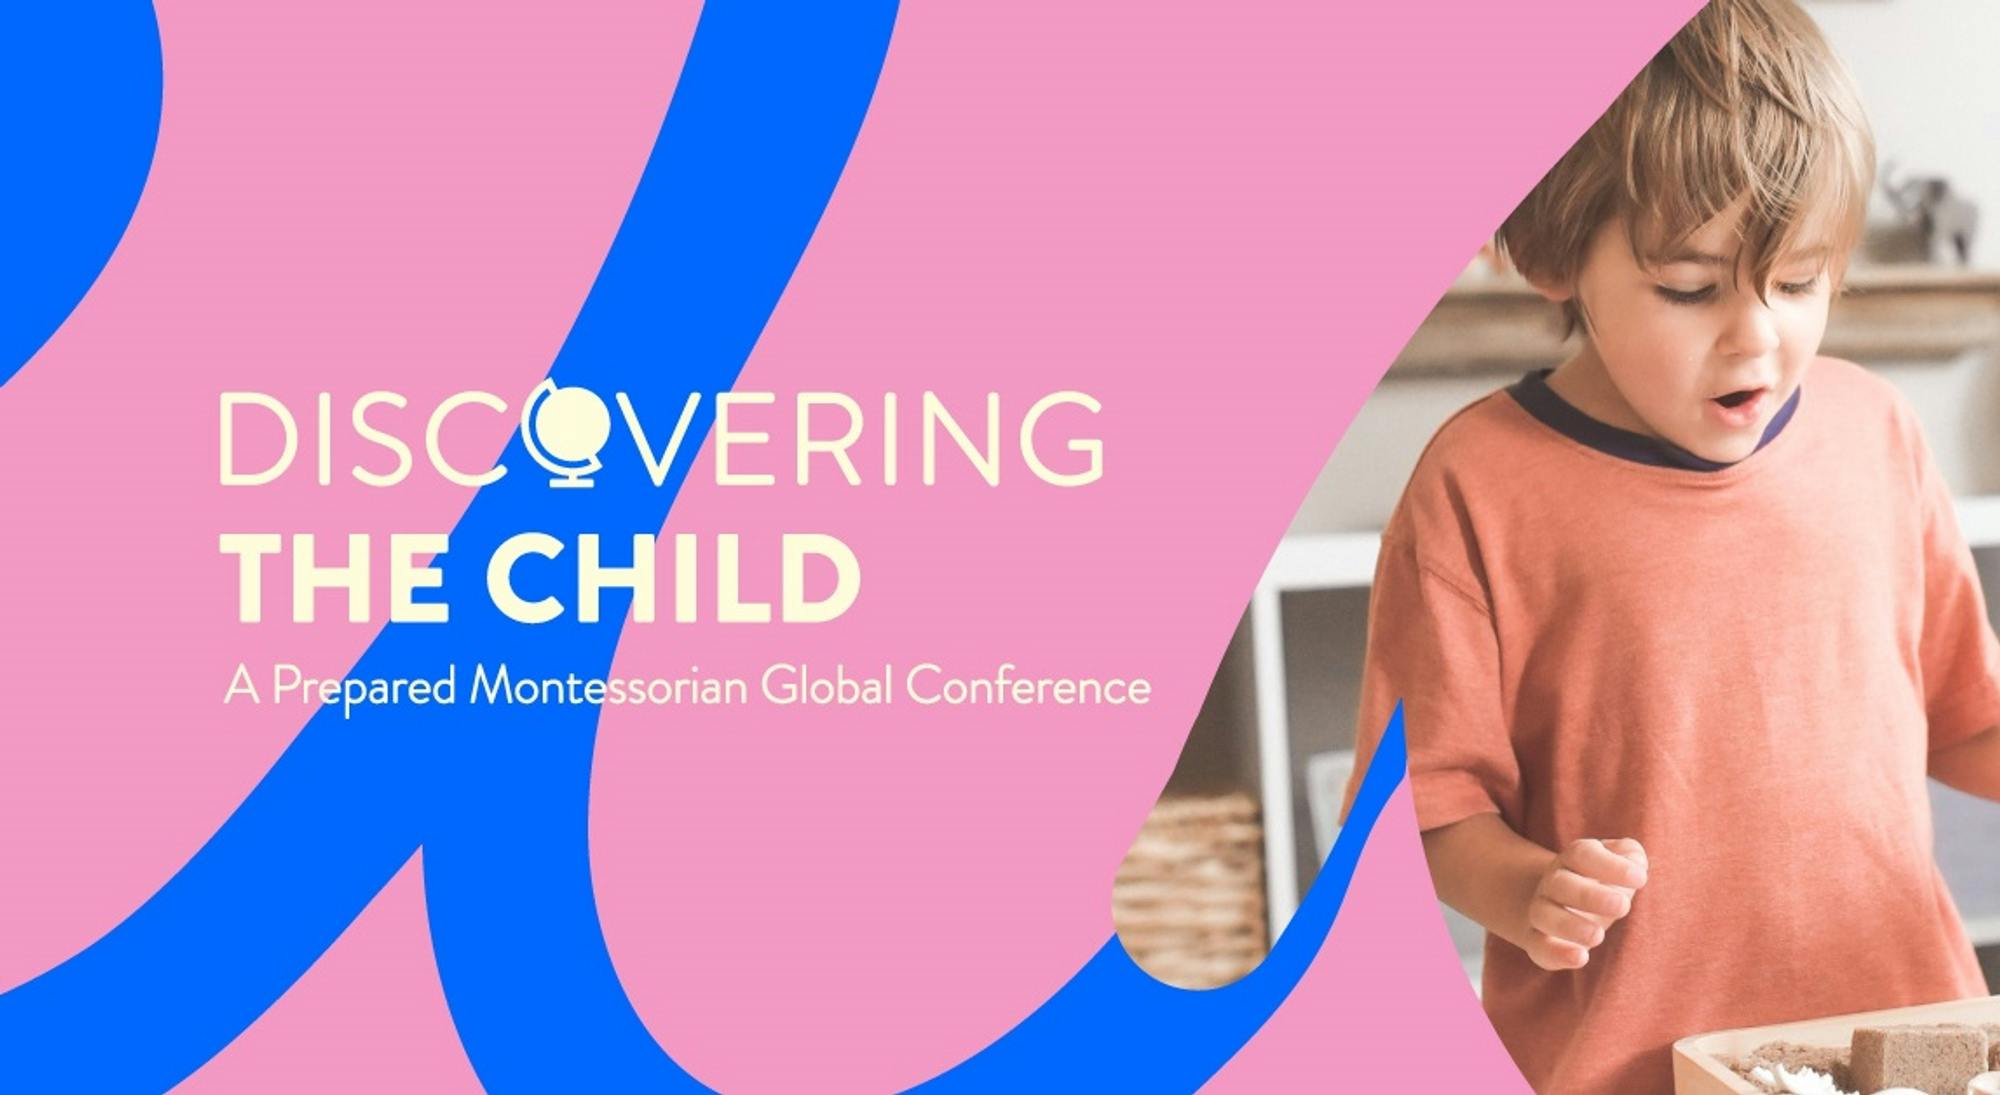 Highlights from the Discovering the Child Conference